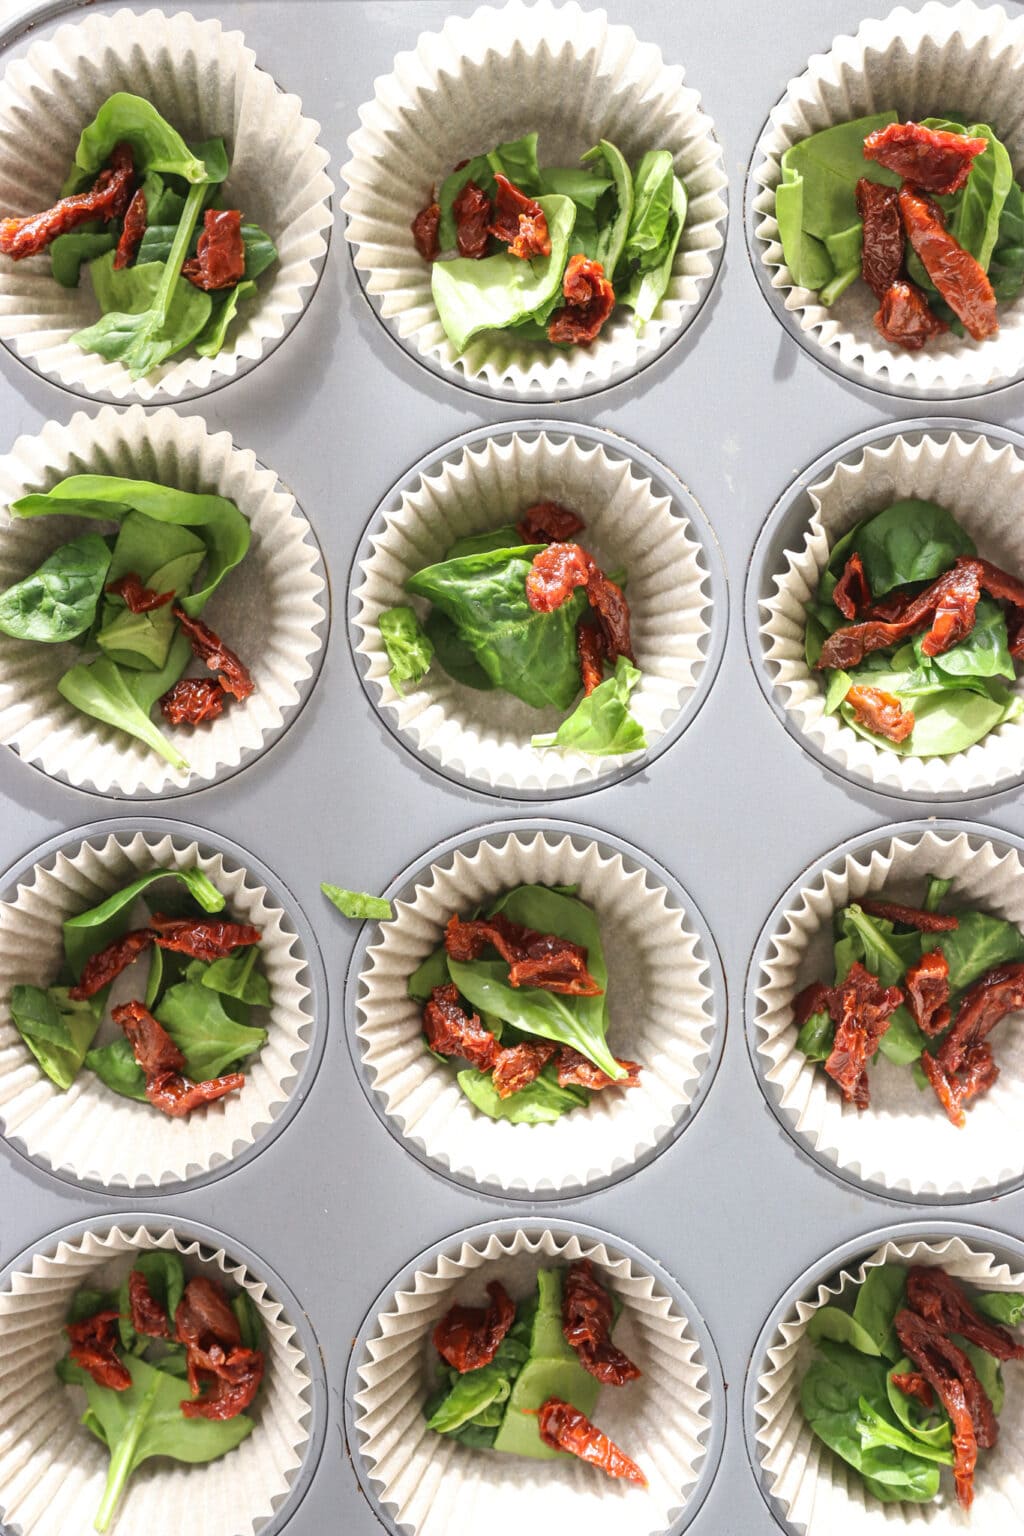 Ingredients being prepared in a muffin tin for Egg Bites with Cottage Cheese, Spinach & Sun-dried Tomatoes, including the sun dried tomatoes and spinach